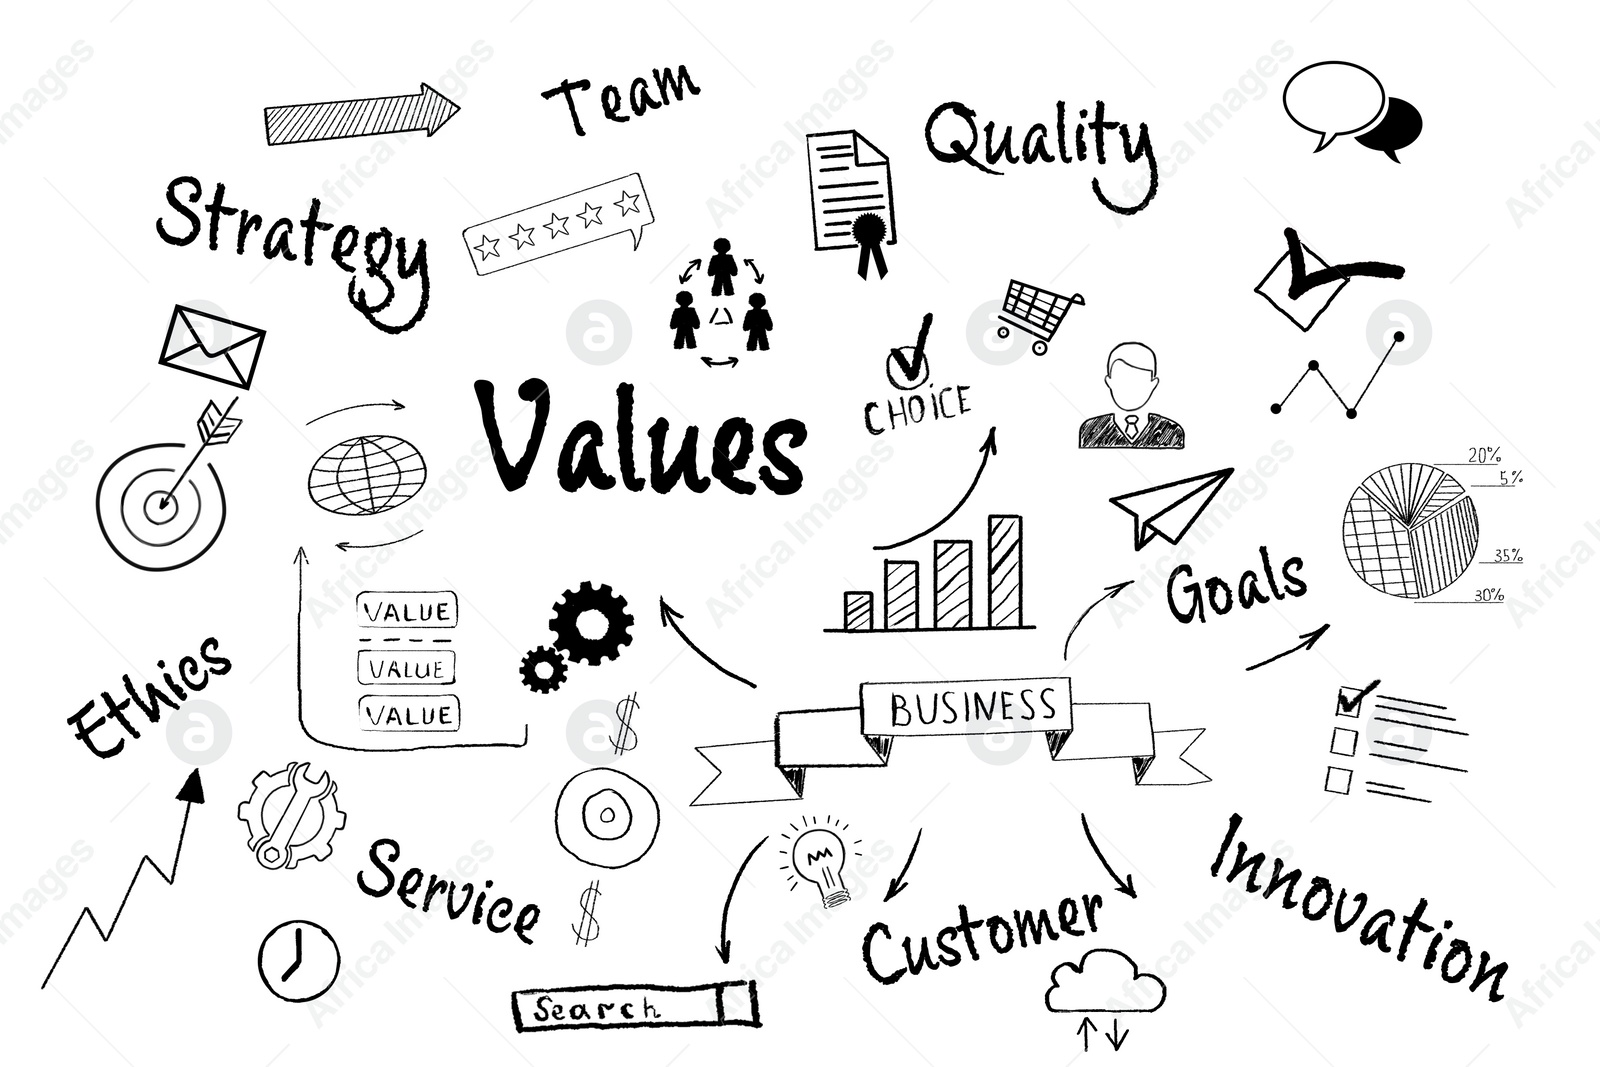 Illustration of Concept of core values. Different images on white background, illustration